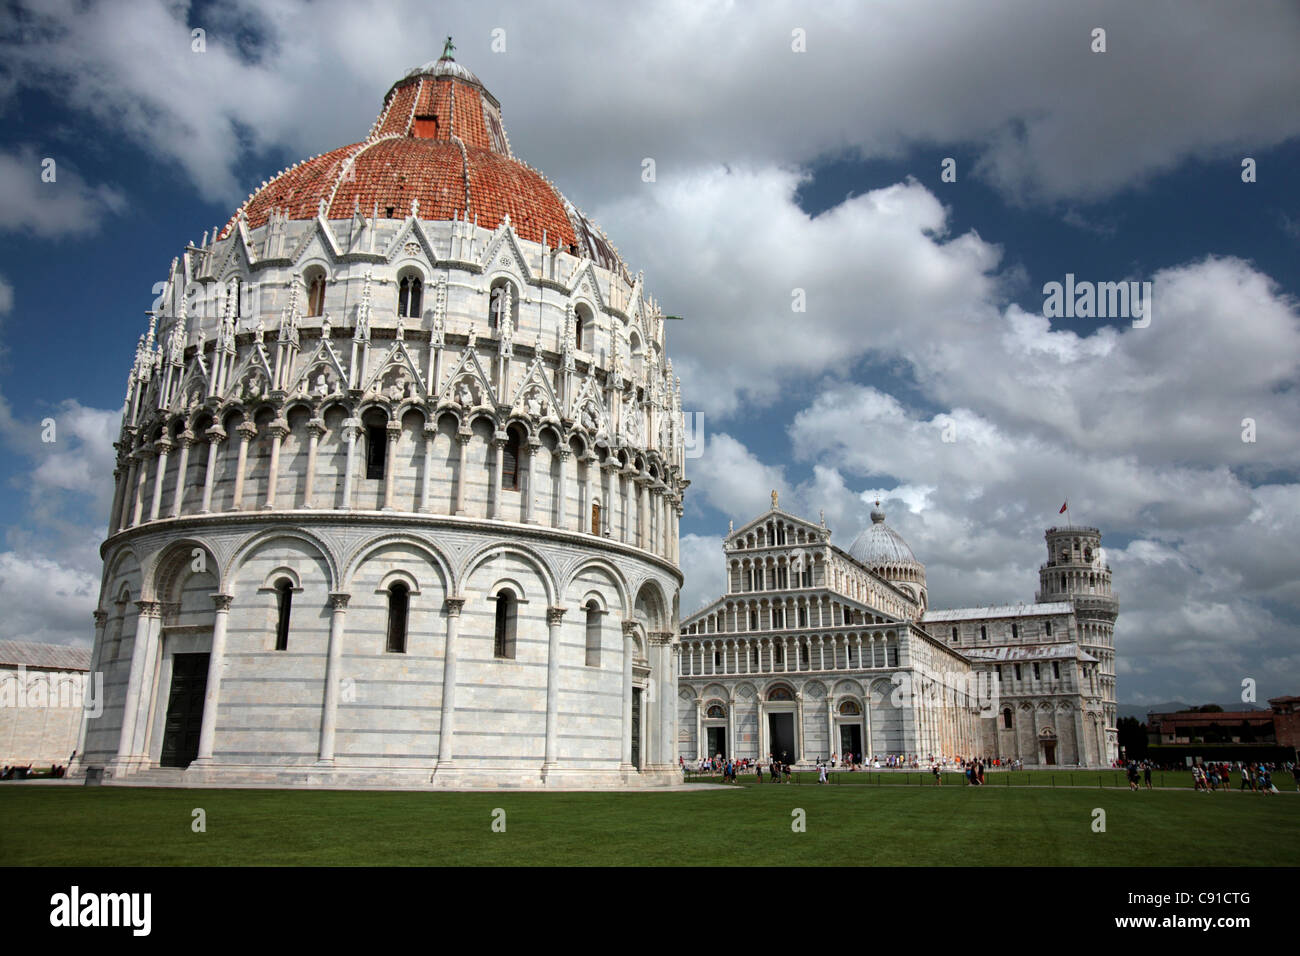 The Baptistry of St. John is a religious building in the Piazza dei Miracoli a wide walled area in the centre of Pisa set in a Stock Photo